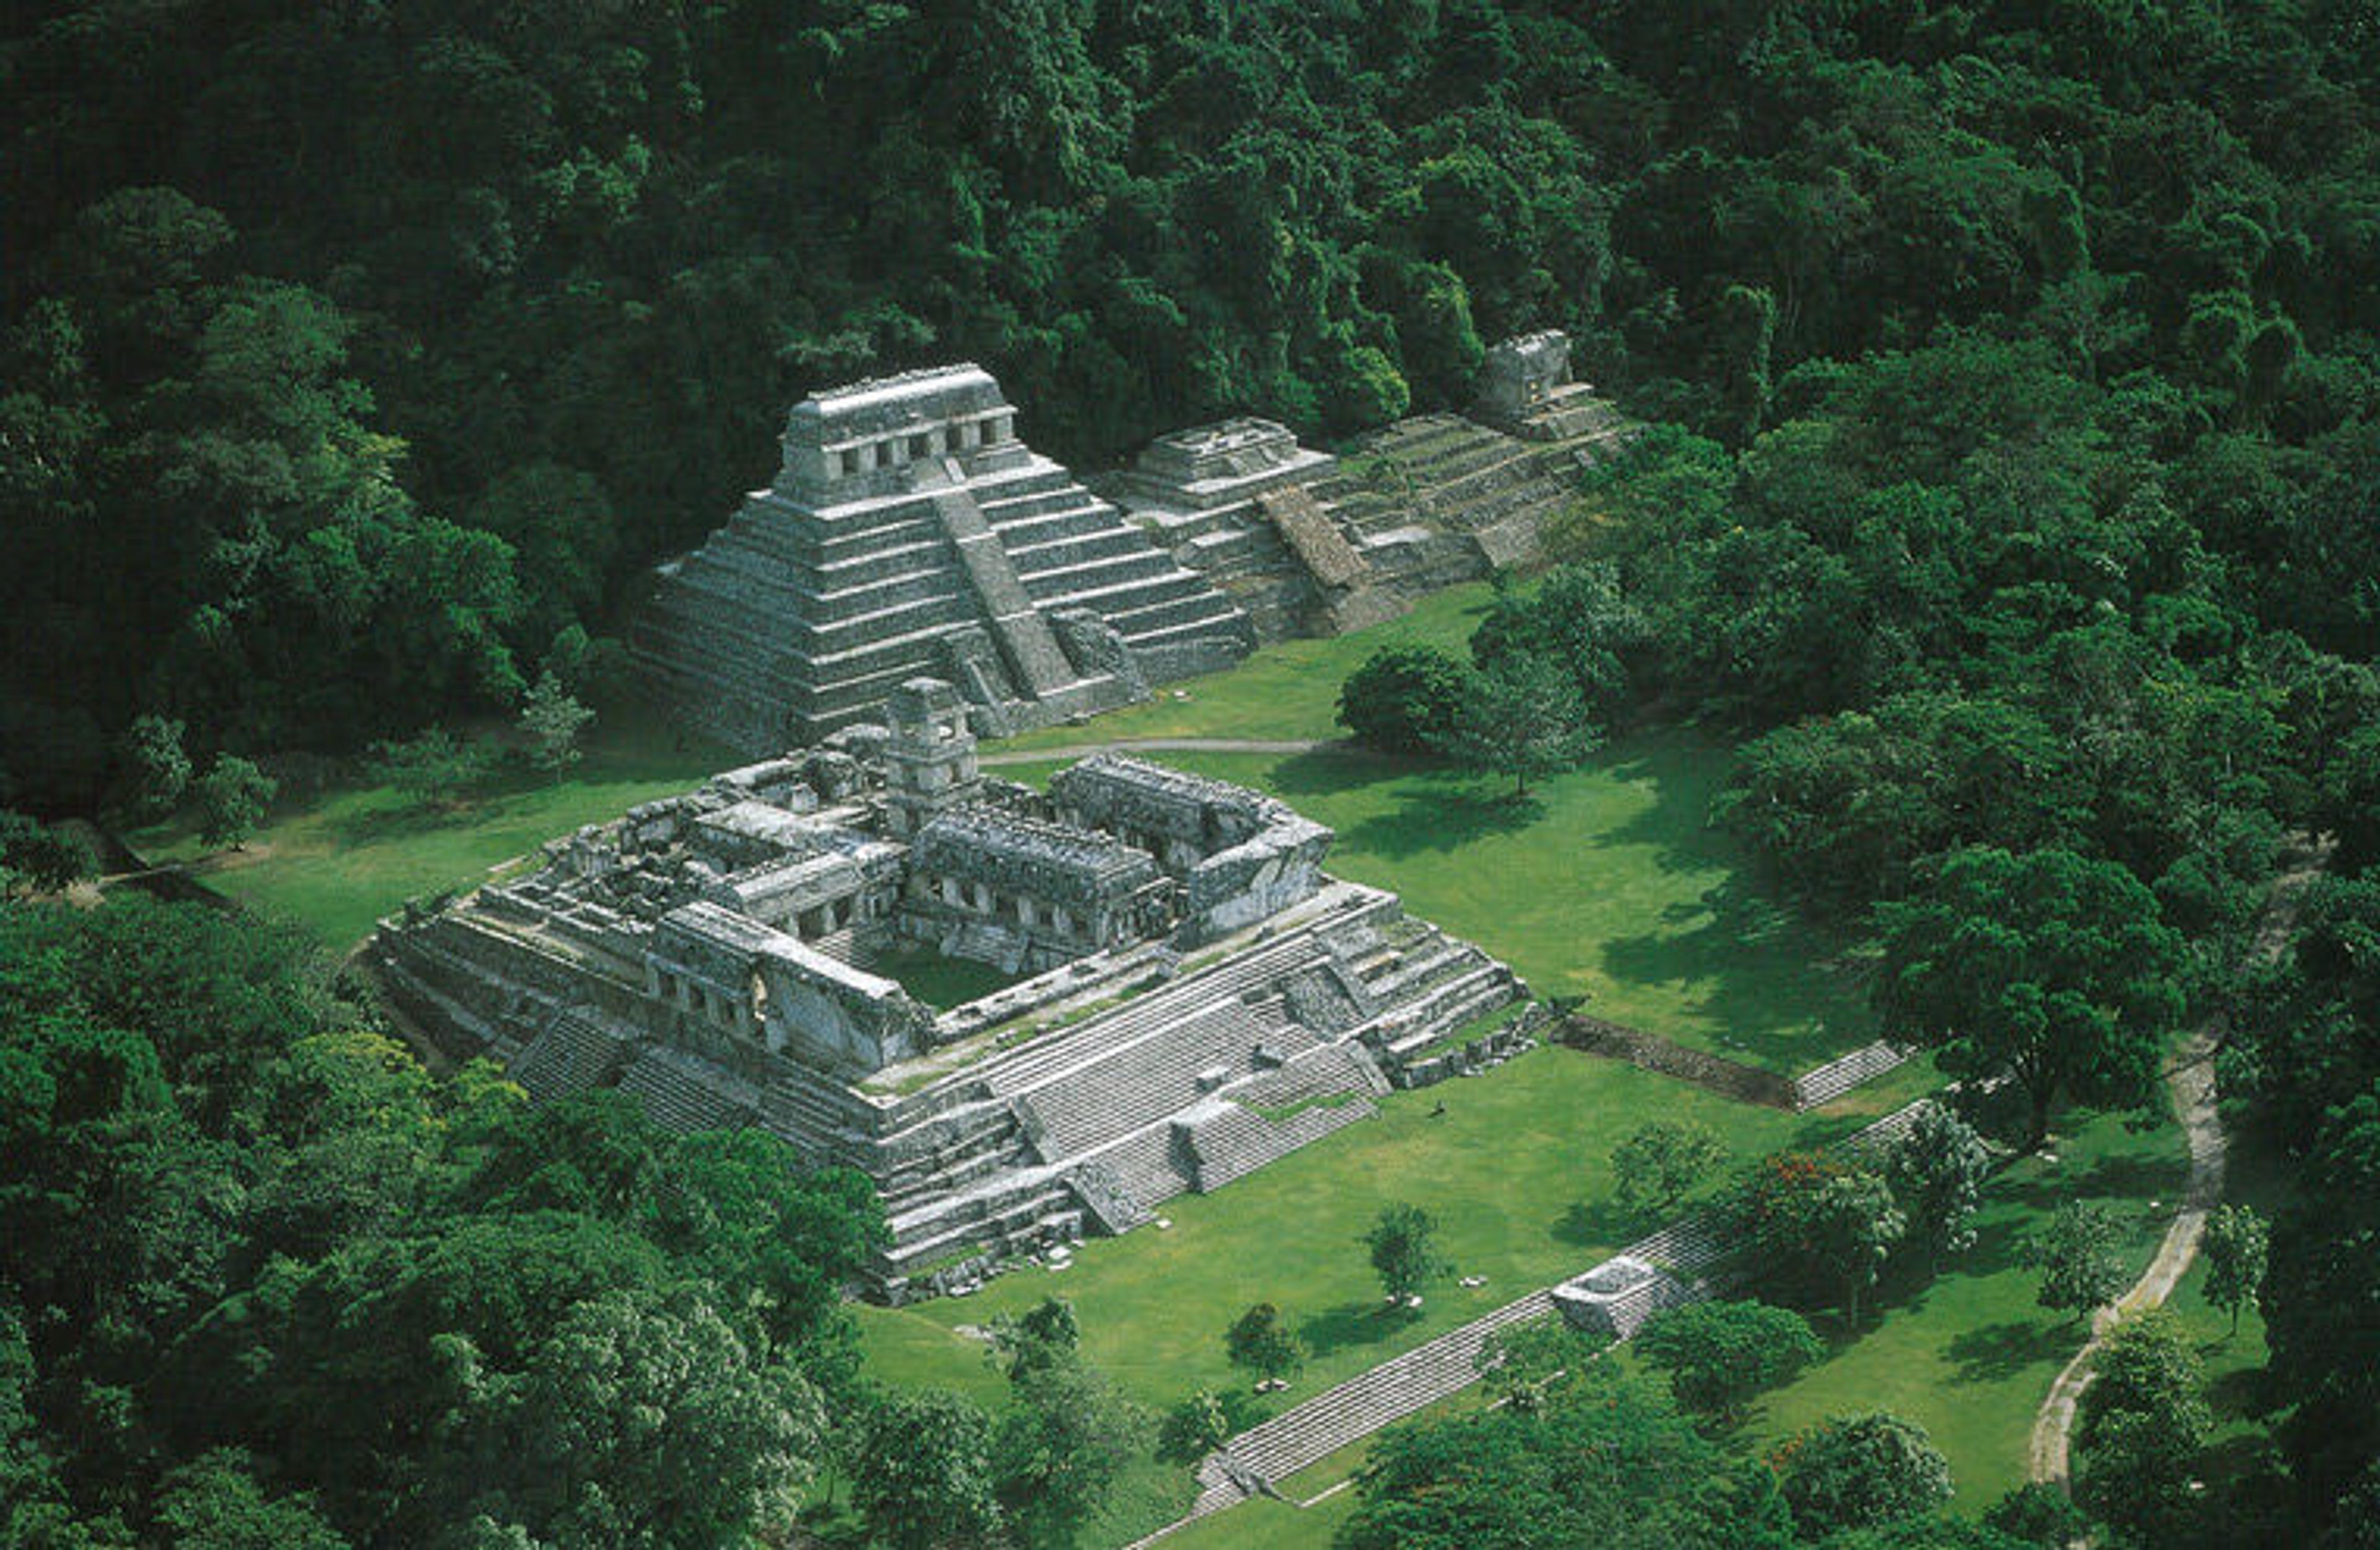 Aerial view of a Maya palace surrounded by forest